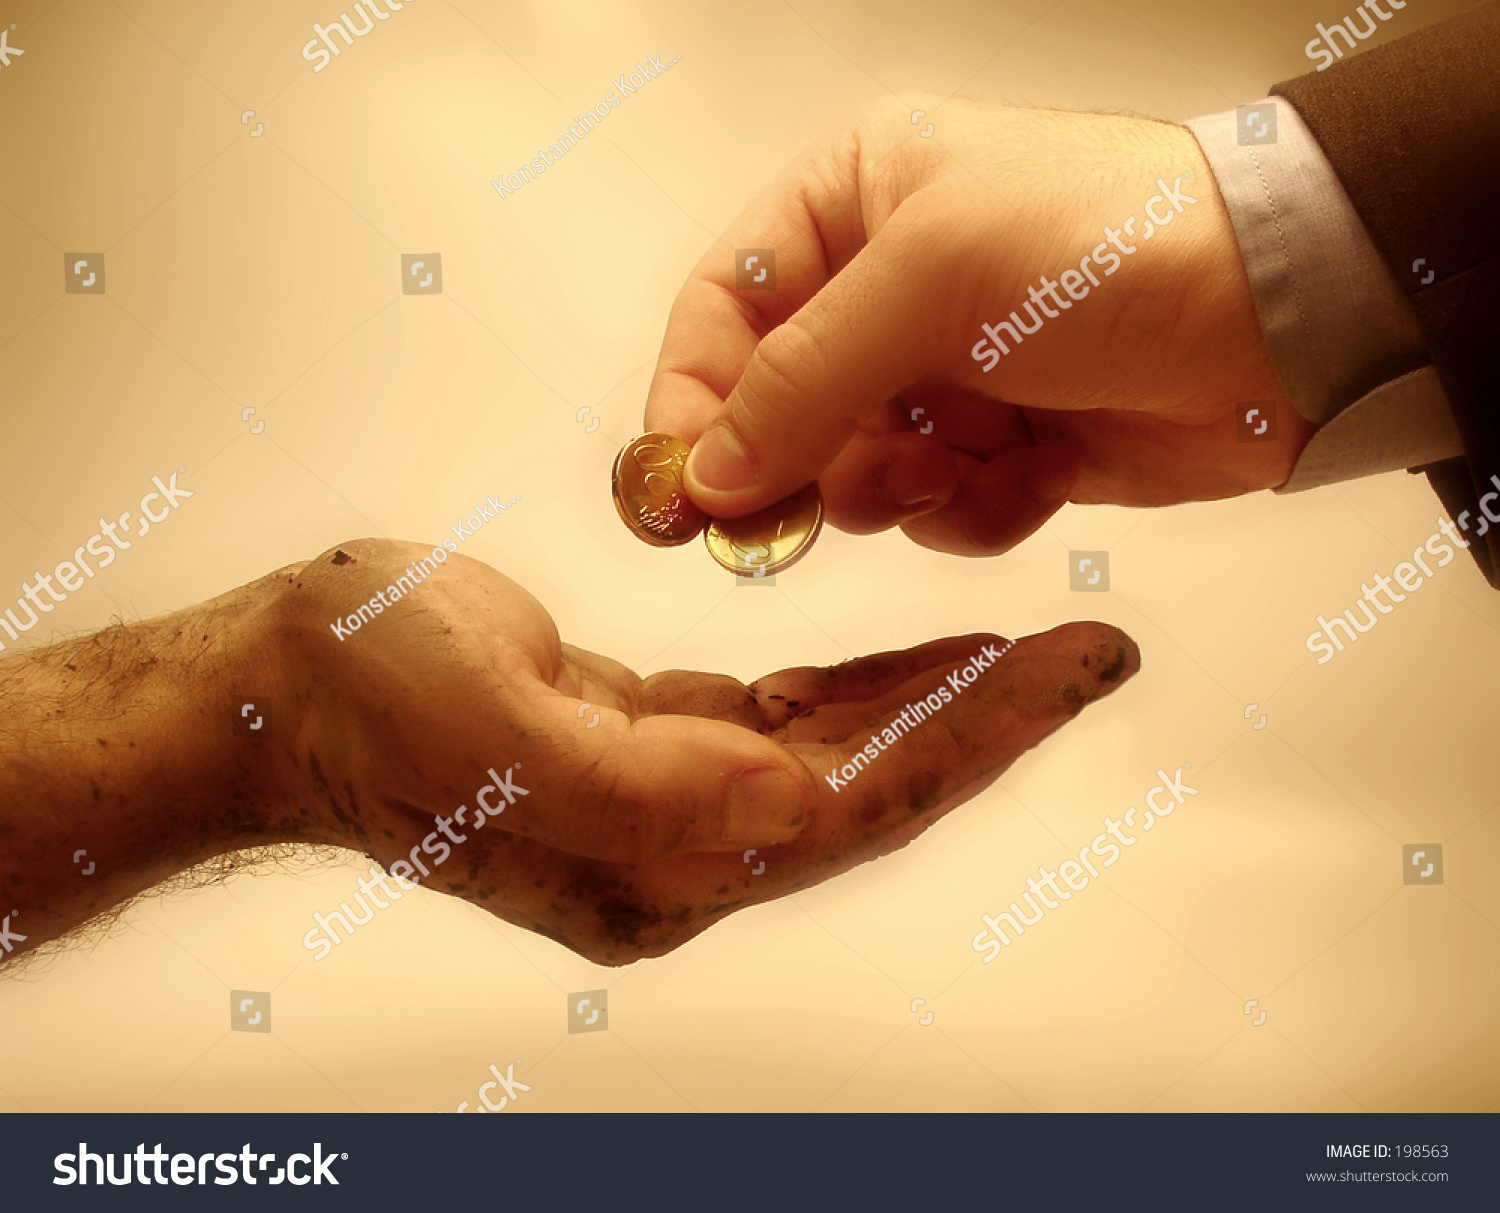 stock photo wealthy person giving money to a poor one hands 198563